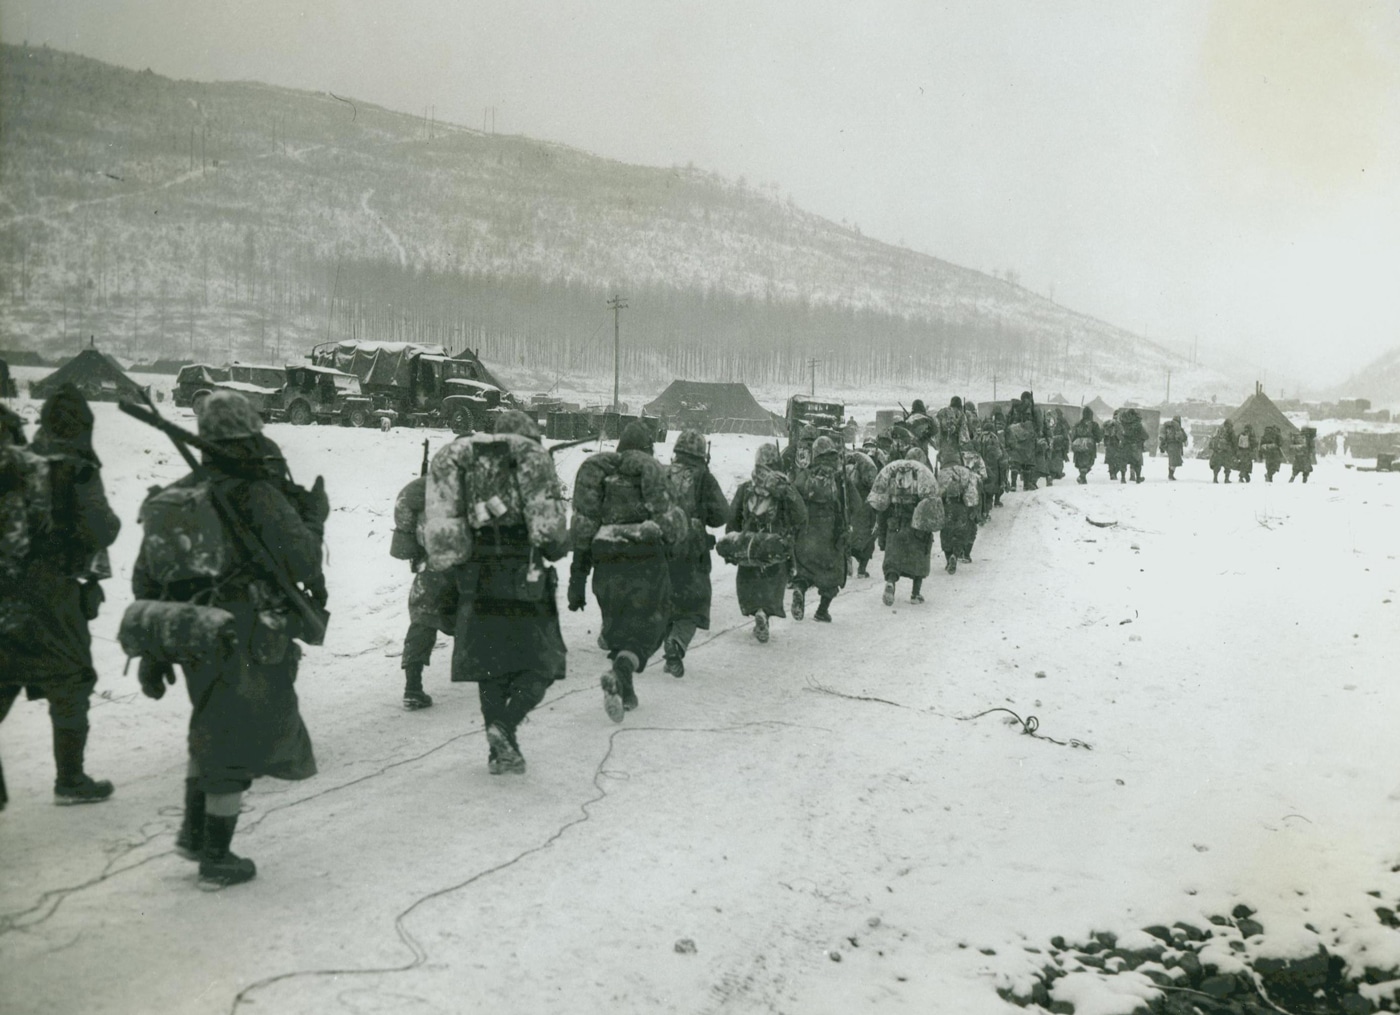 In this photograph, U.S. Marines march through the snow. Part of a regimental combat team under General Douglas MacArthur, the Marines both received and inflicted heavy casualties. The numbers of Chinese communist forces entered the combat with a 4:1 advantage. They suffered about 50% losses due to the tenacity of the UN forces.